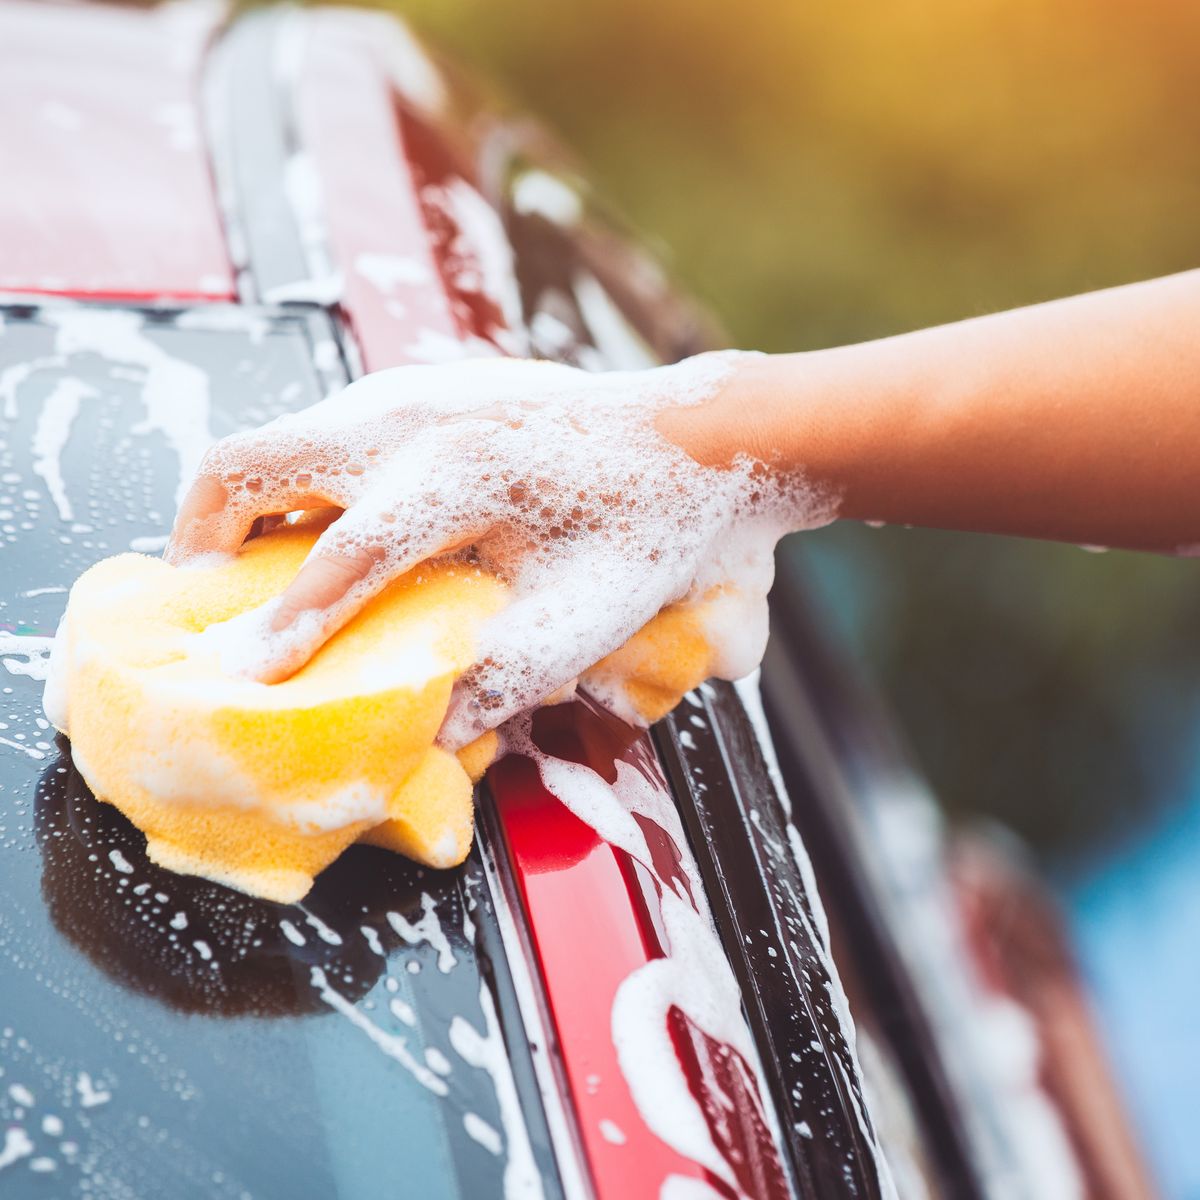 What Is The Best Car Wash Soap To Remove Dirt?